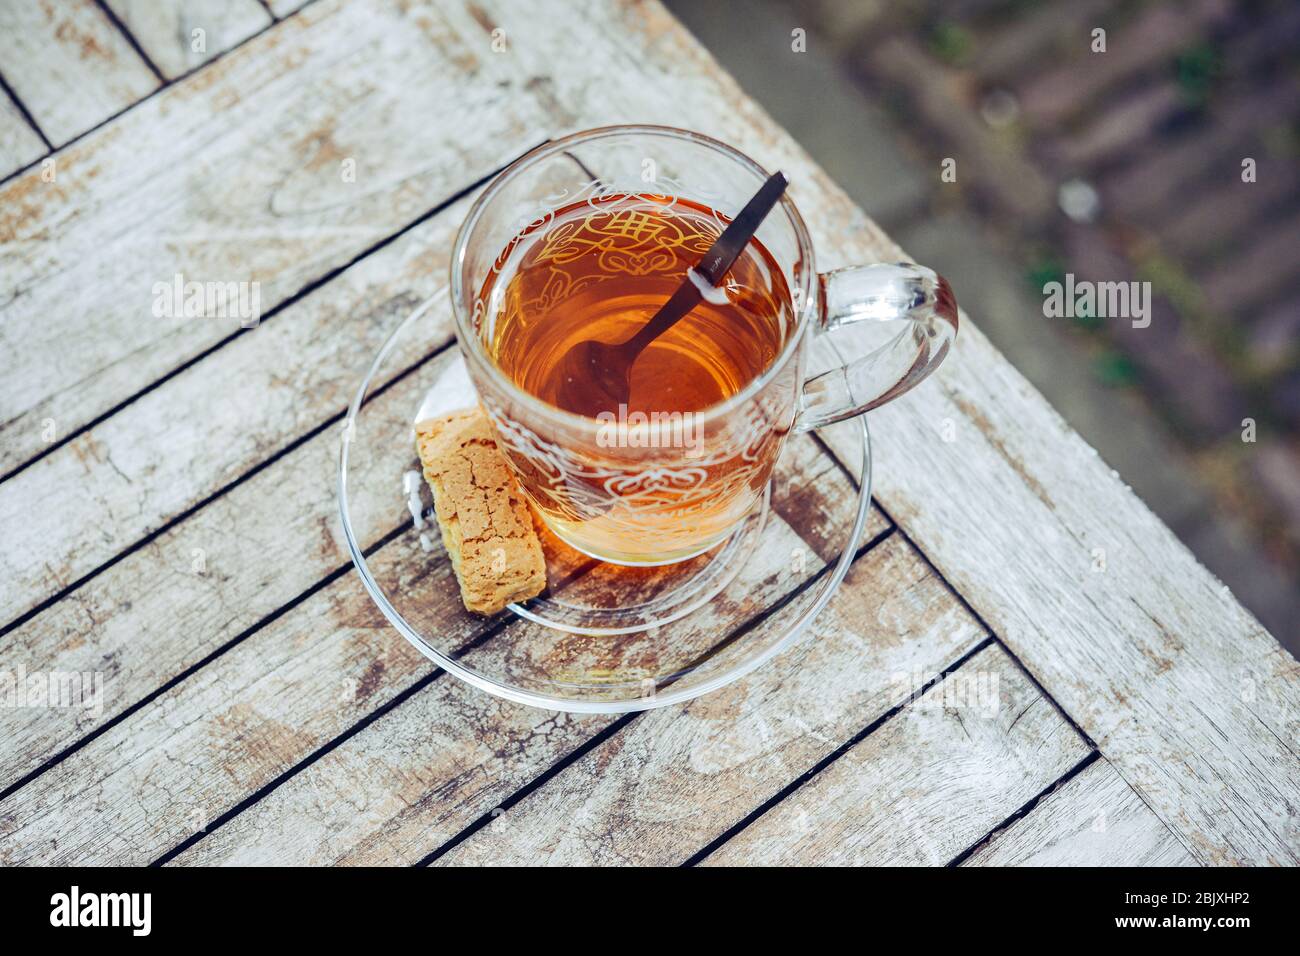 Glass cup of tea on a rustic wooden table outside in the garden. Tea spoon and cookie biscuit. Healthy lifestyle. Stock Photo